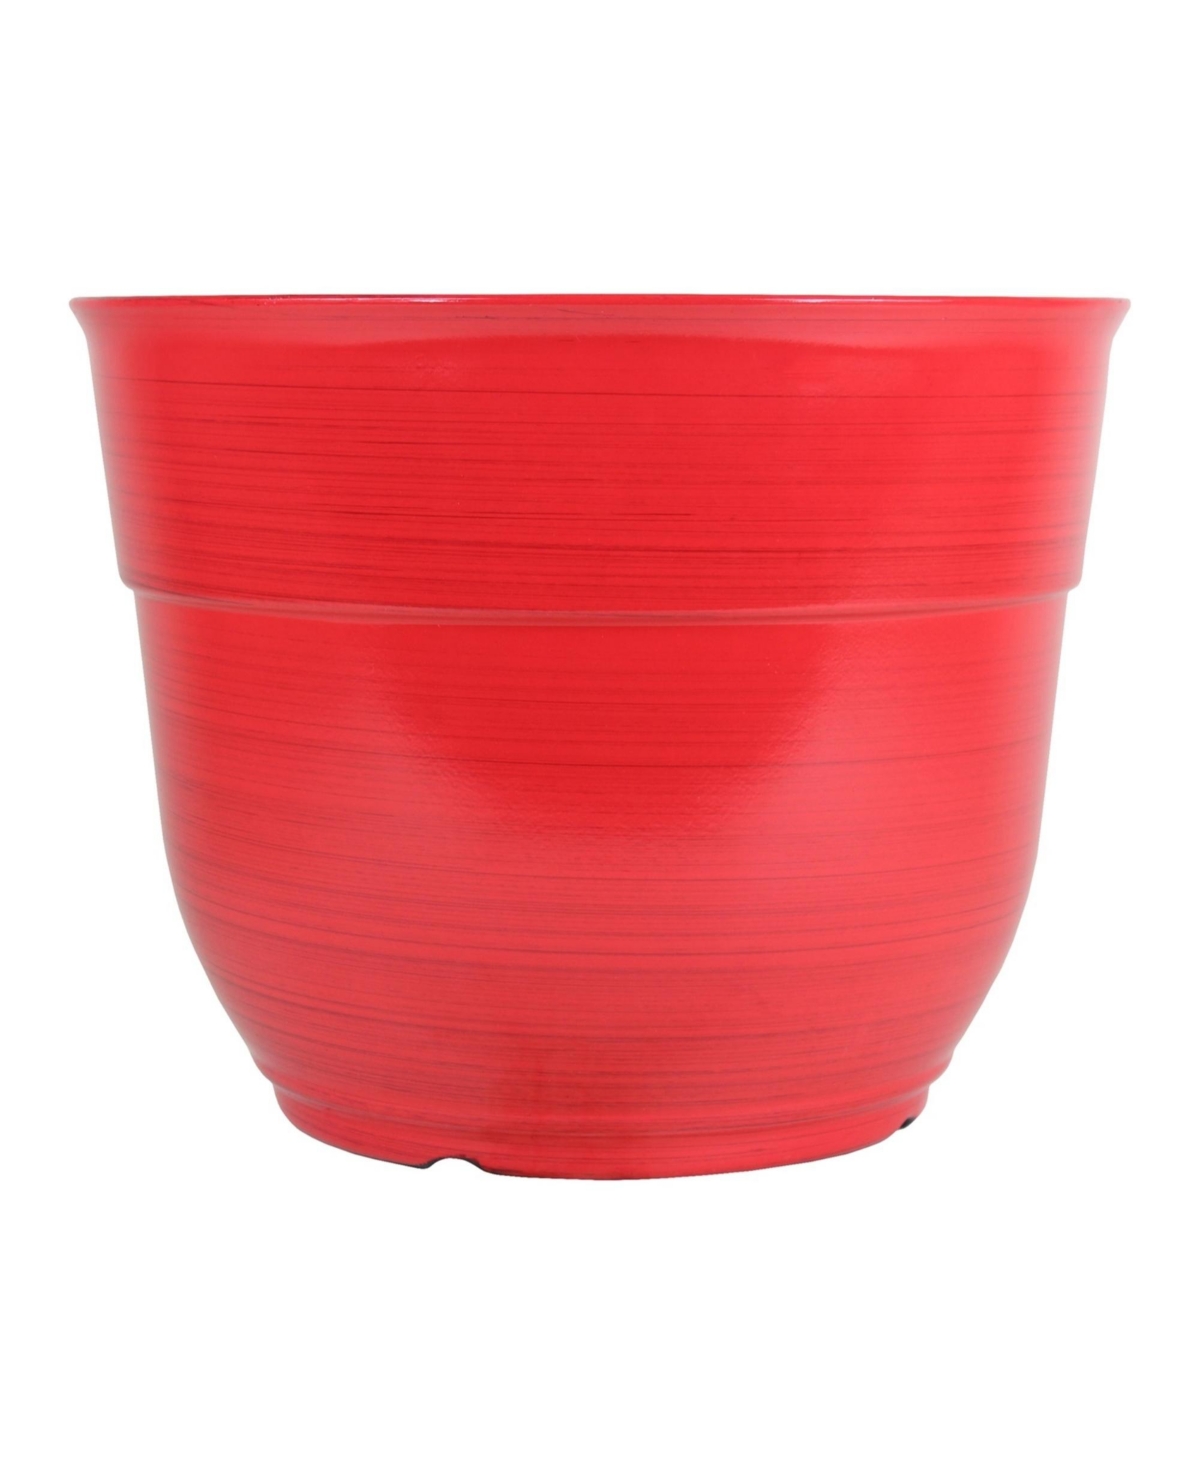 Glazed Brushed Happy Large Plastic Planter Bright Red 15 Inch - Red